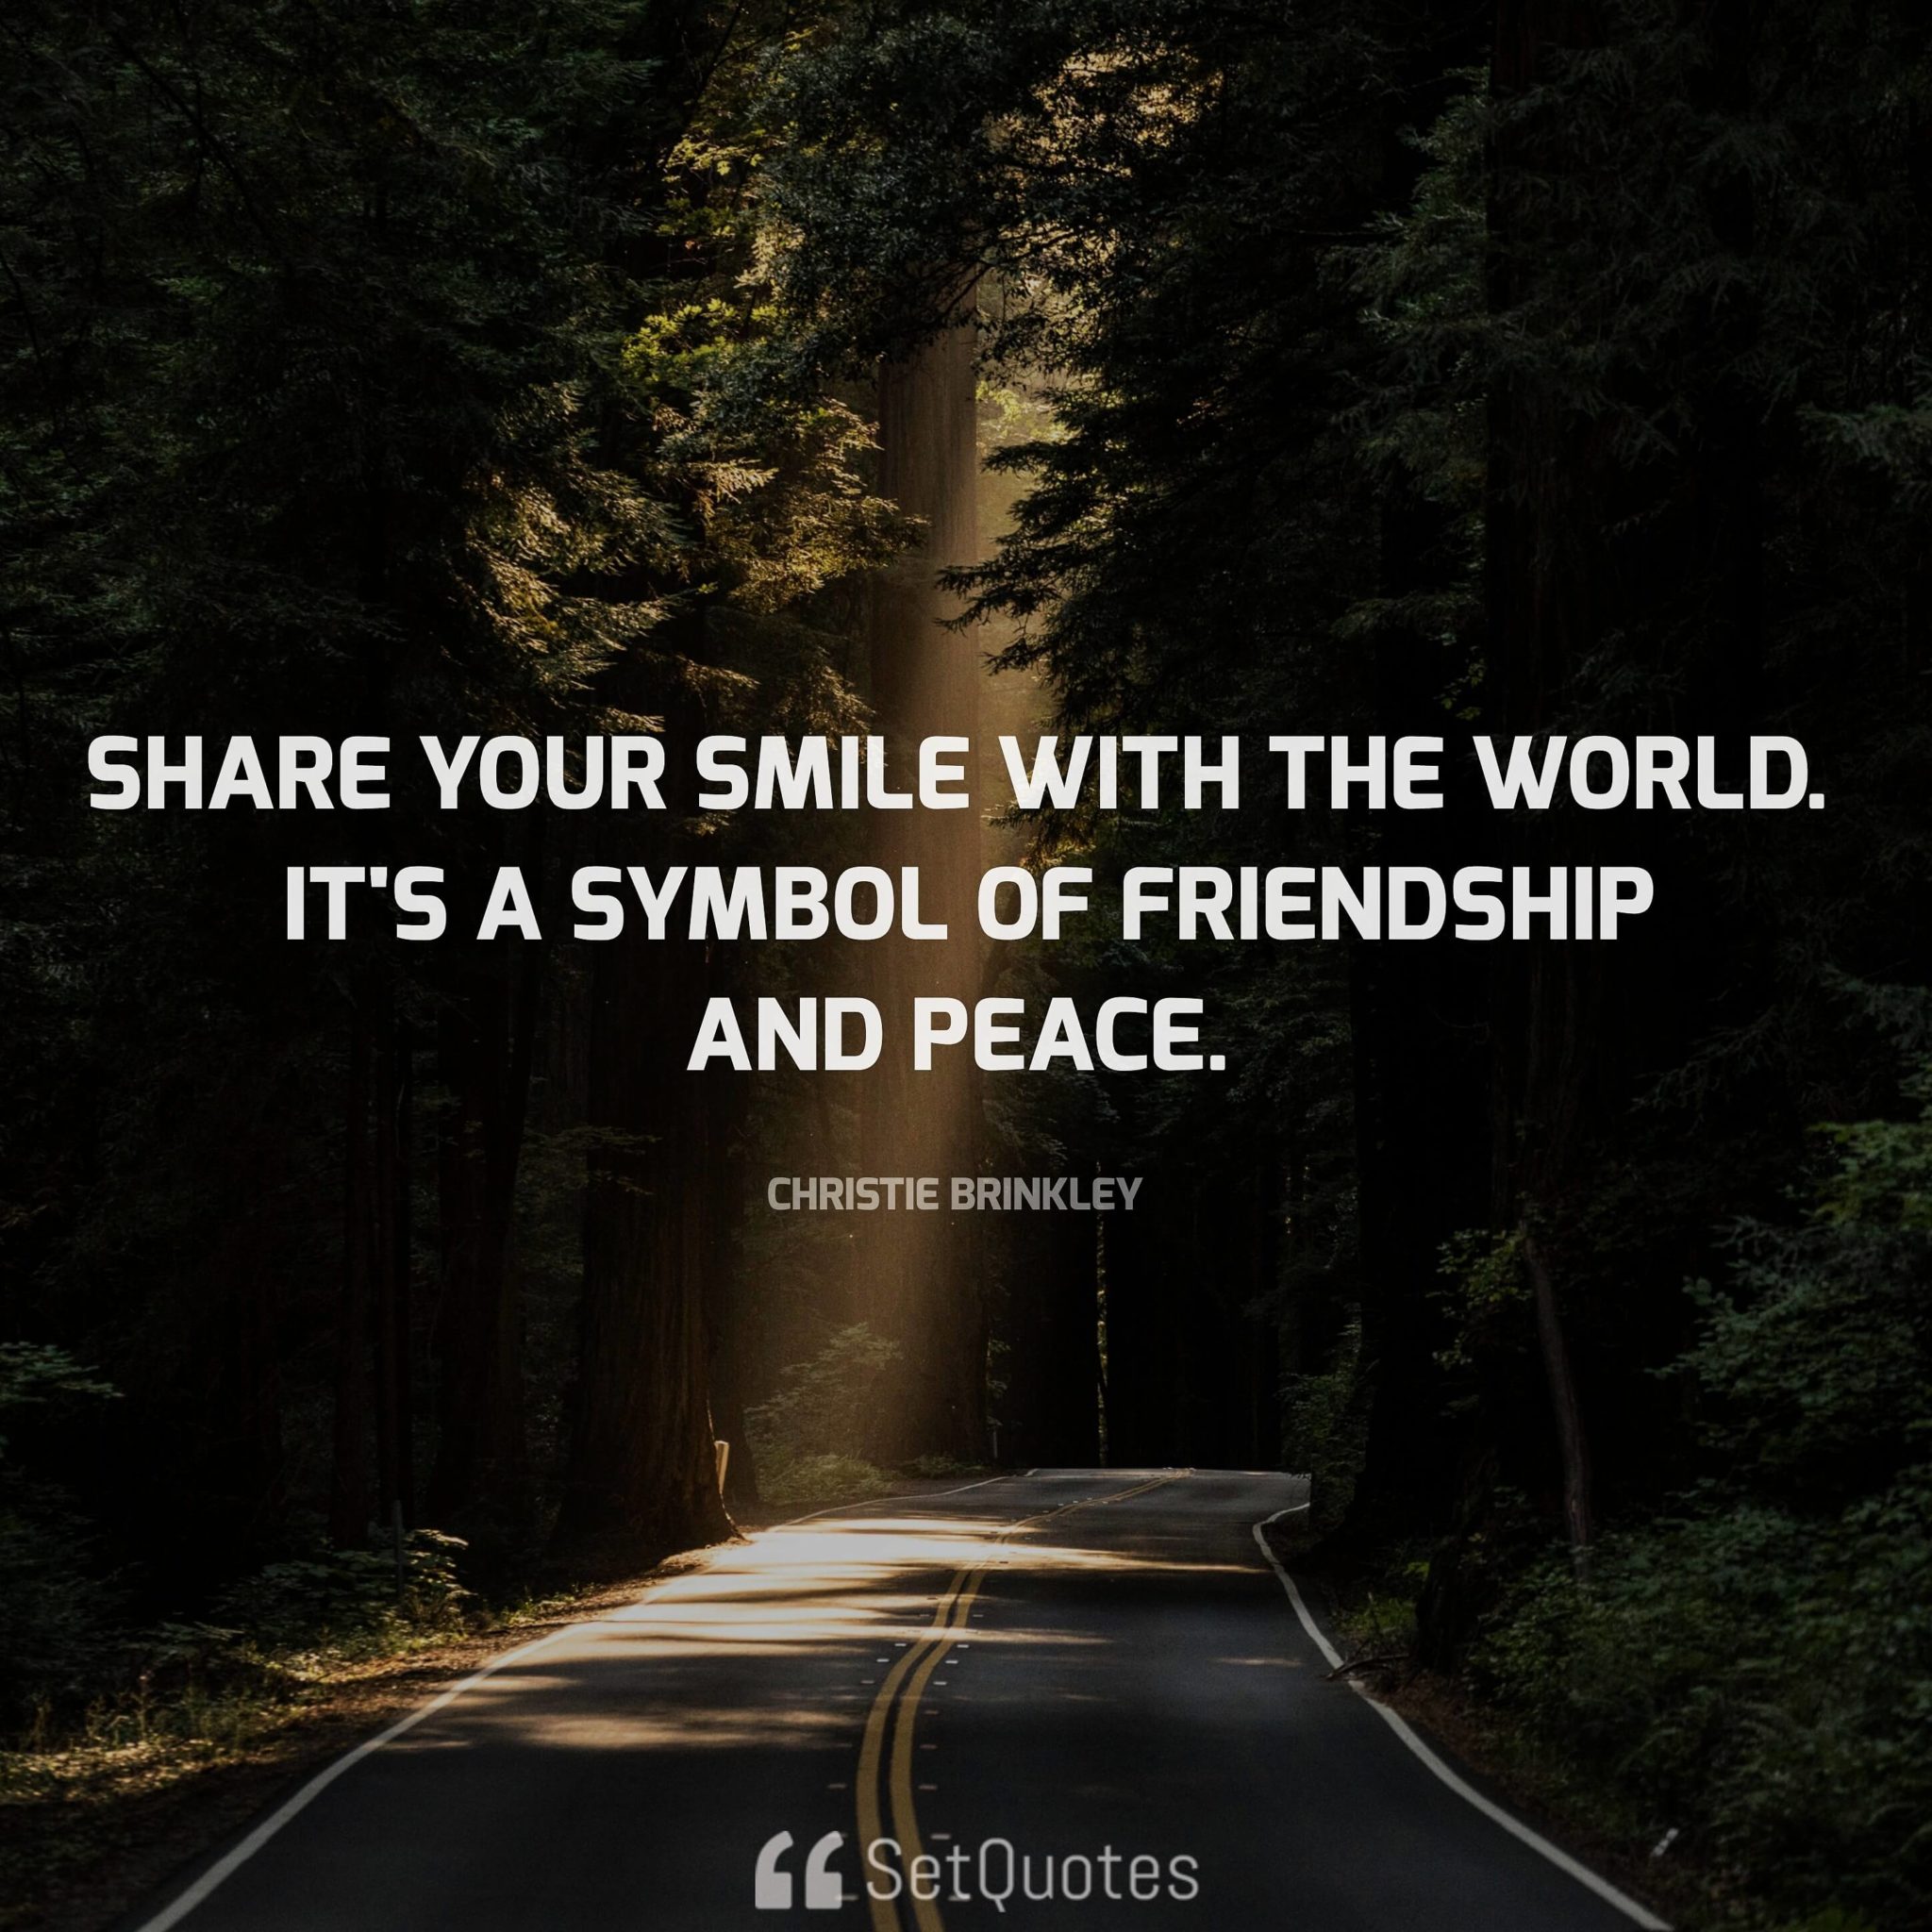 "Share your smile with the world. It's a symbol of friendship and peace." - Christie Brinkley